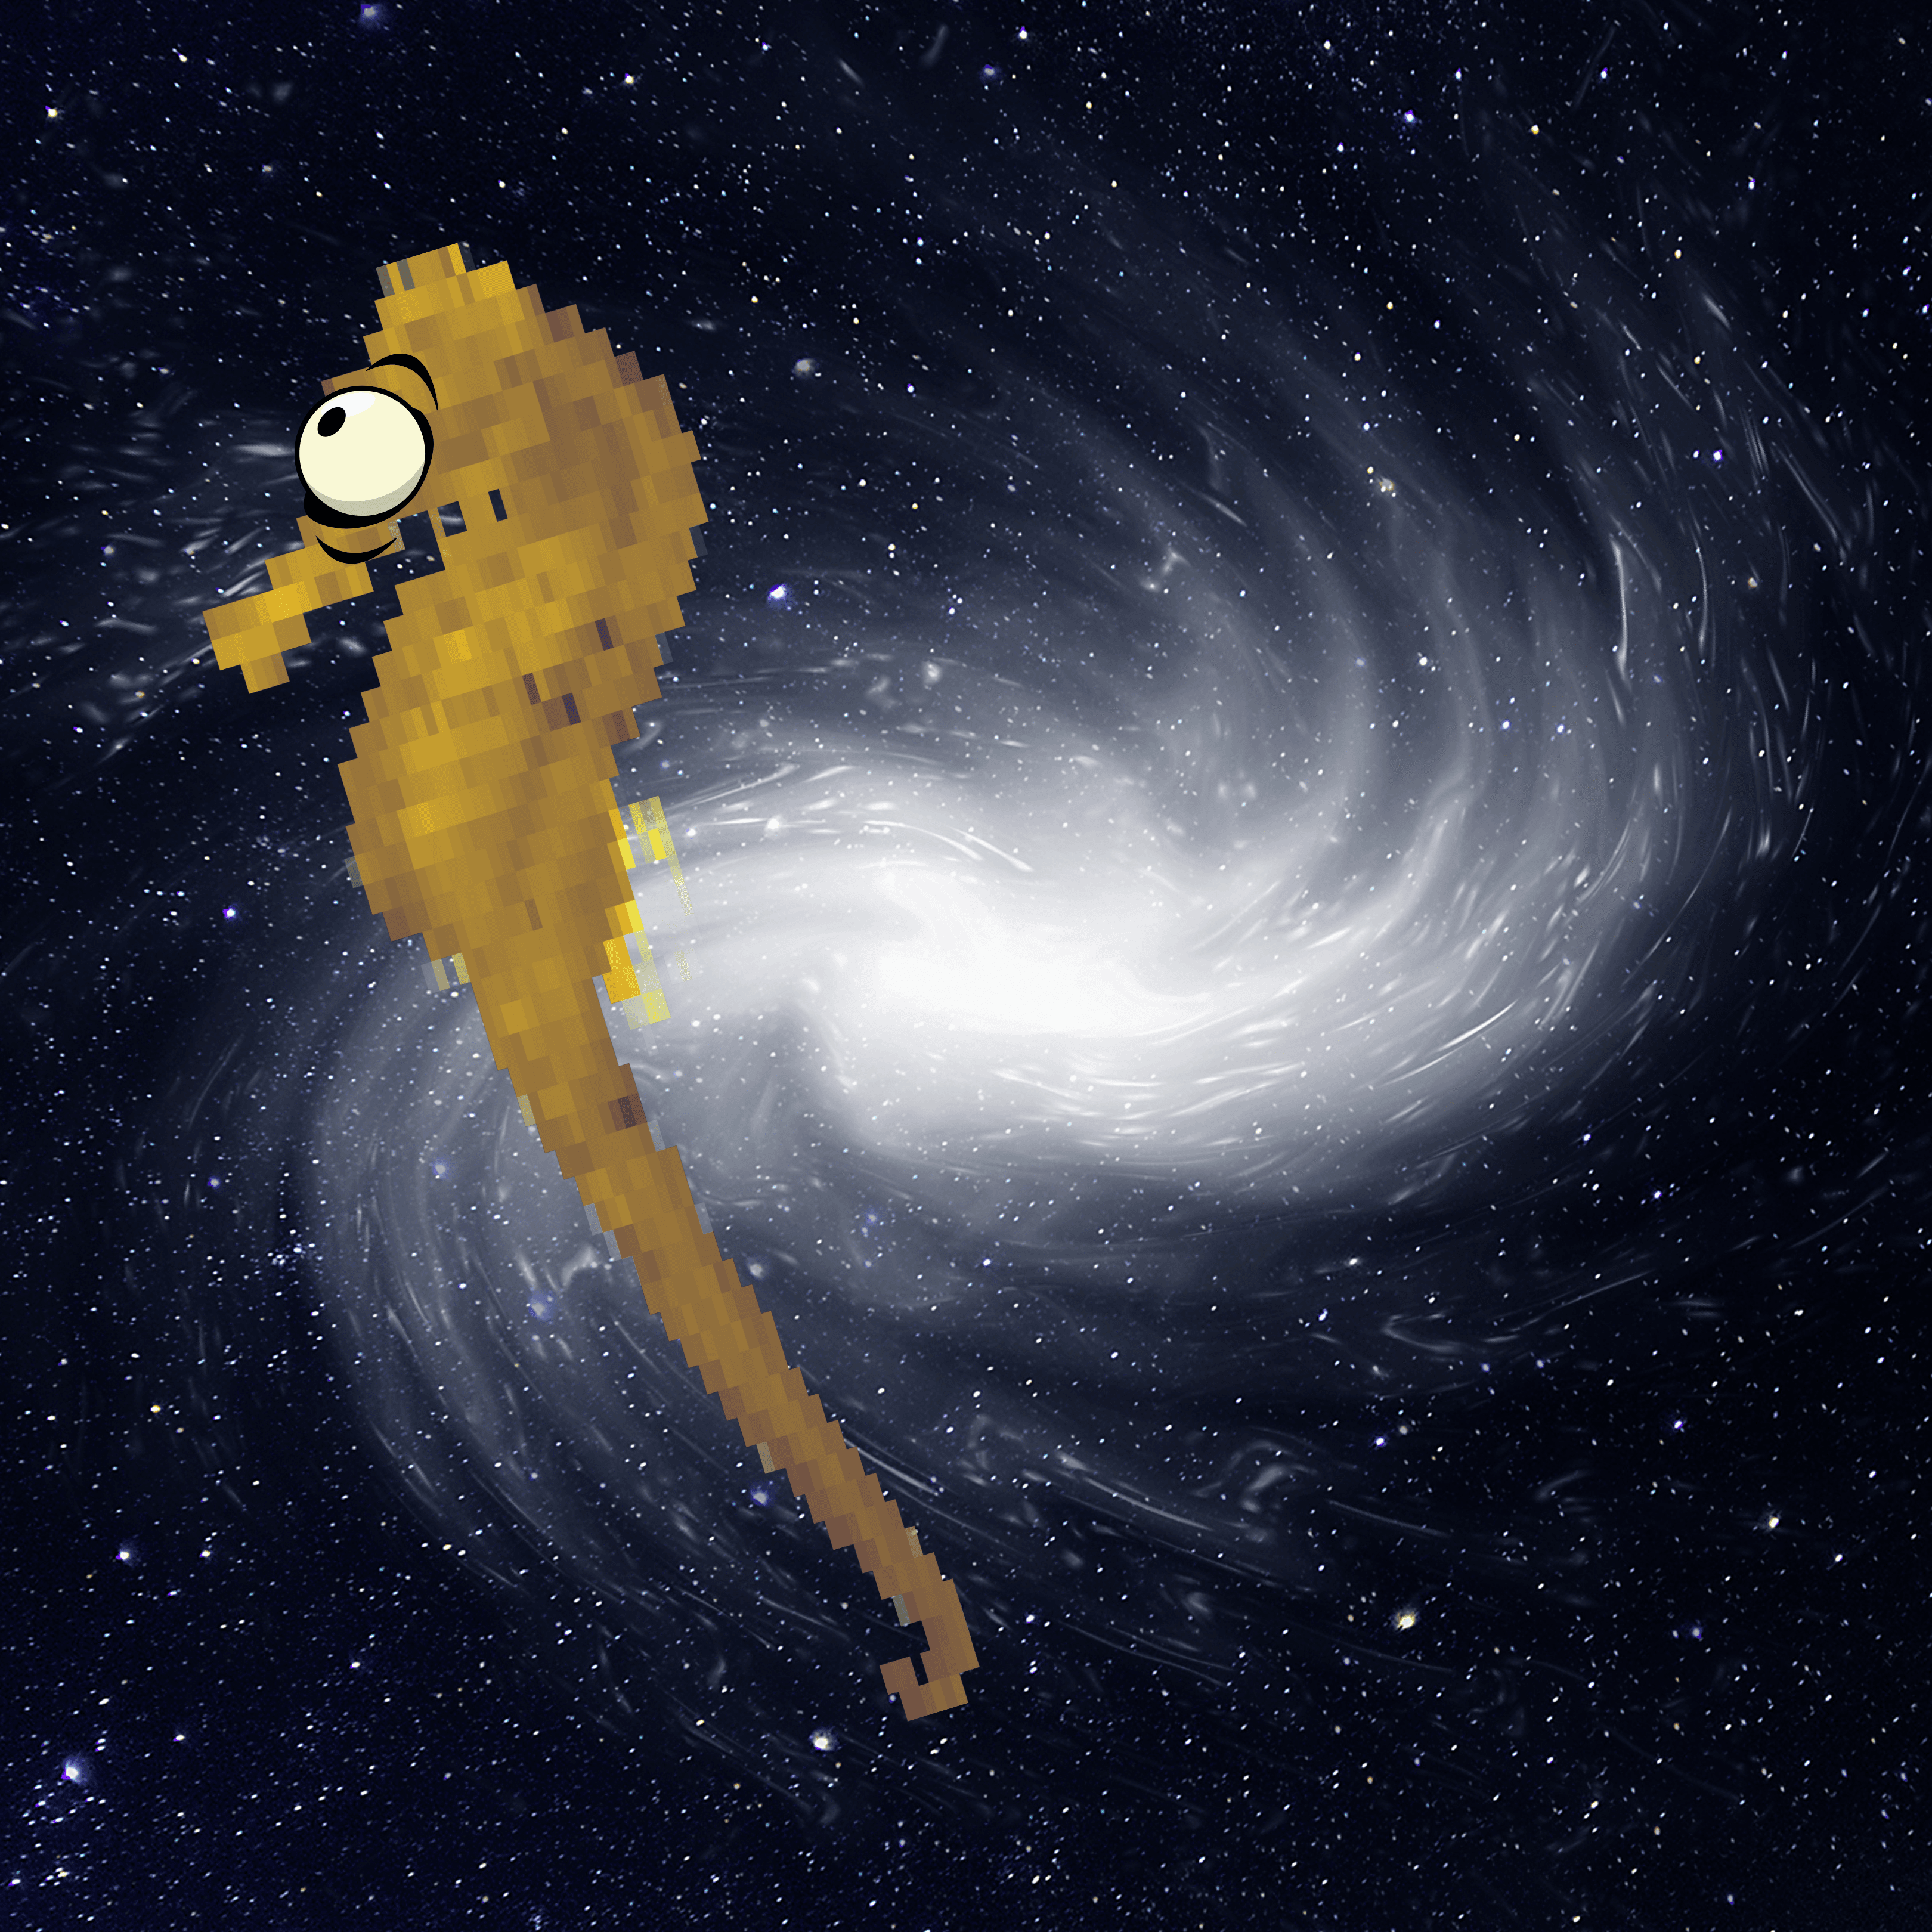 Seahorse in Space XII